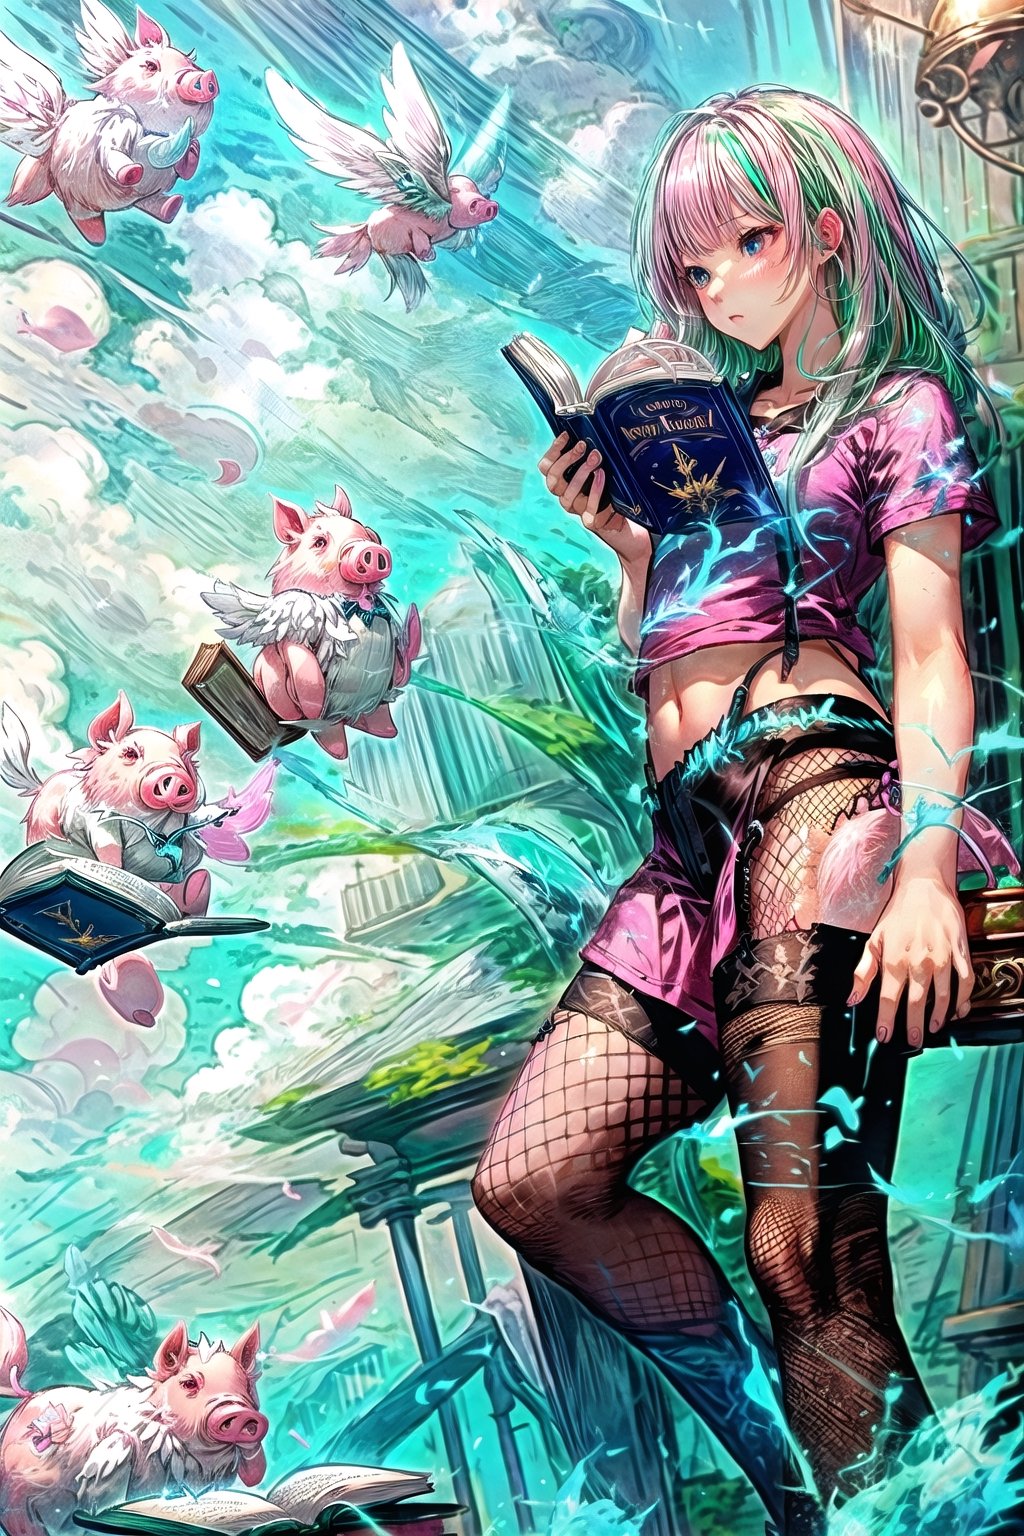 Clean face,Masterpiece,One thick girl,blue flames Background,green with White Hair,right pink T-shirt,reading a book in one Hand,
Magic,flying books in the air,fishnet legwear ,pink pigs,